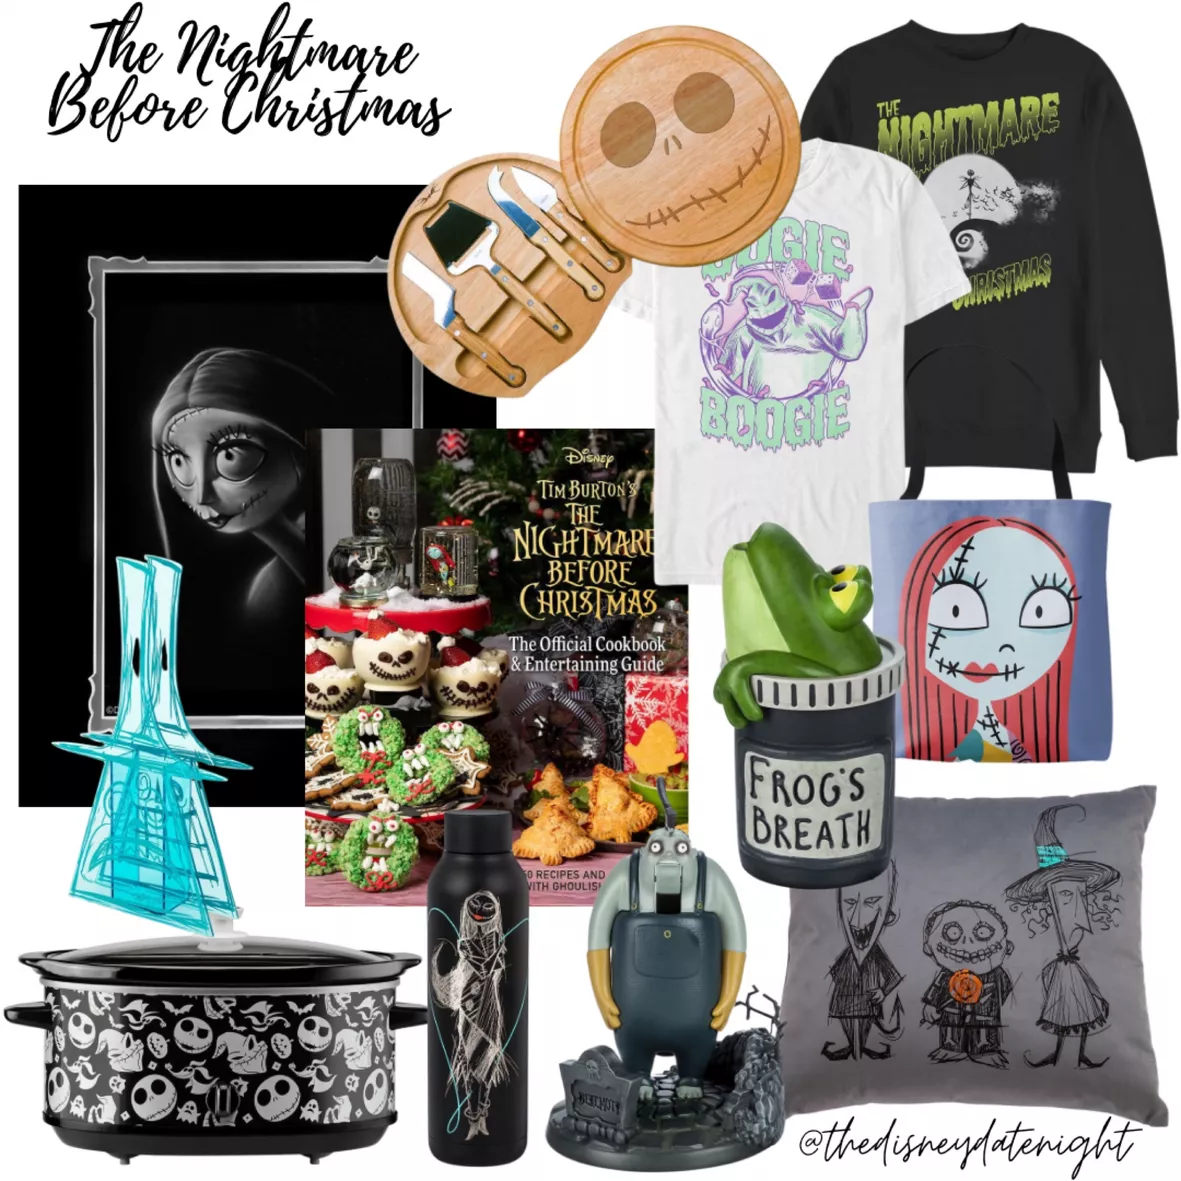 The Nightmare Before Christmas Gifts & Merch